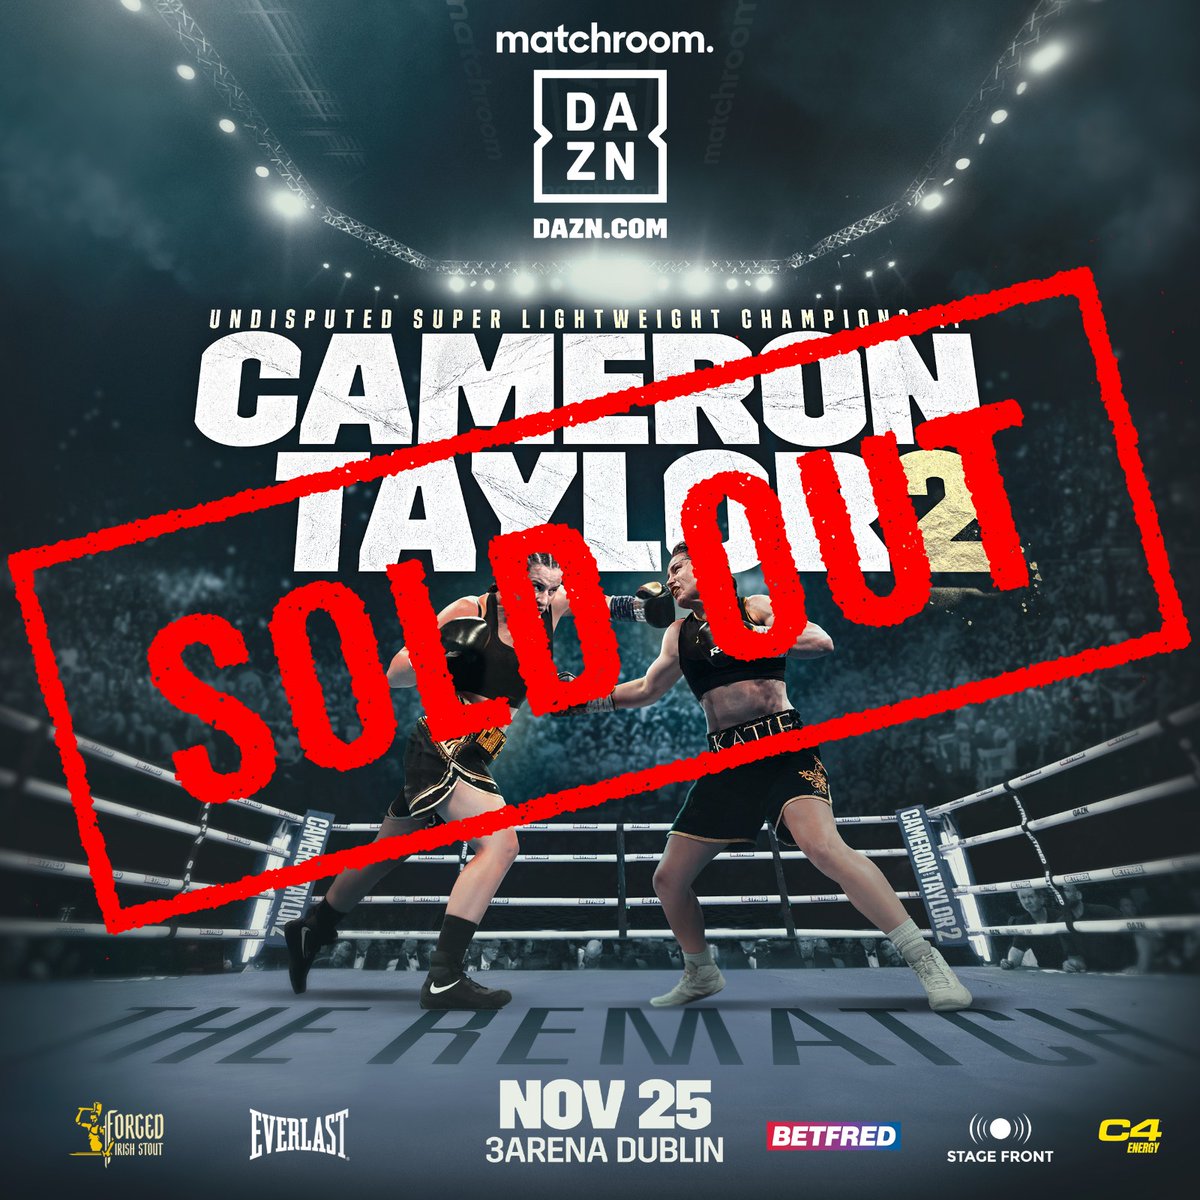 🎟️ #CameronTaylor2 is 𝗦𝗢𝗟𝗗 𝗢𝗨𝗧 🇮🇪 @3ArenaDublin Don't miss the action live on @DAZNBoxing this Saturday 👊